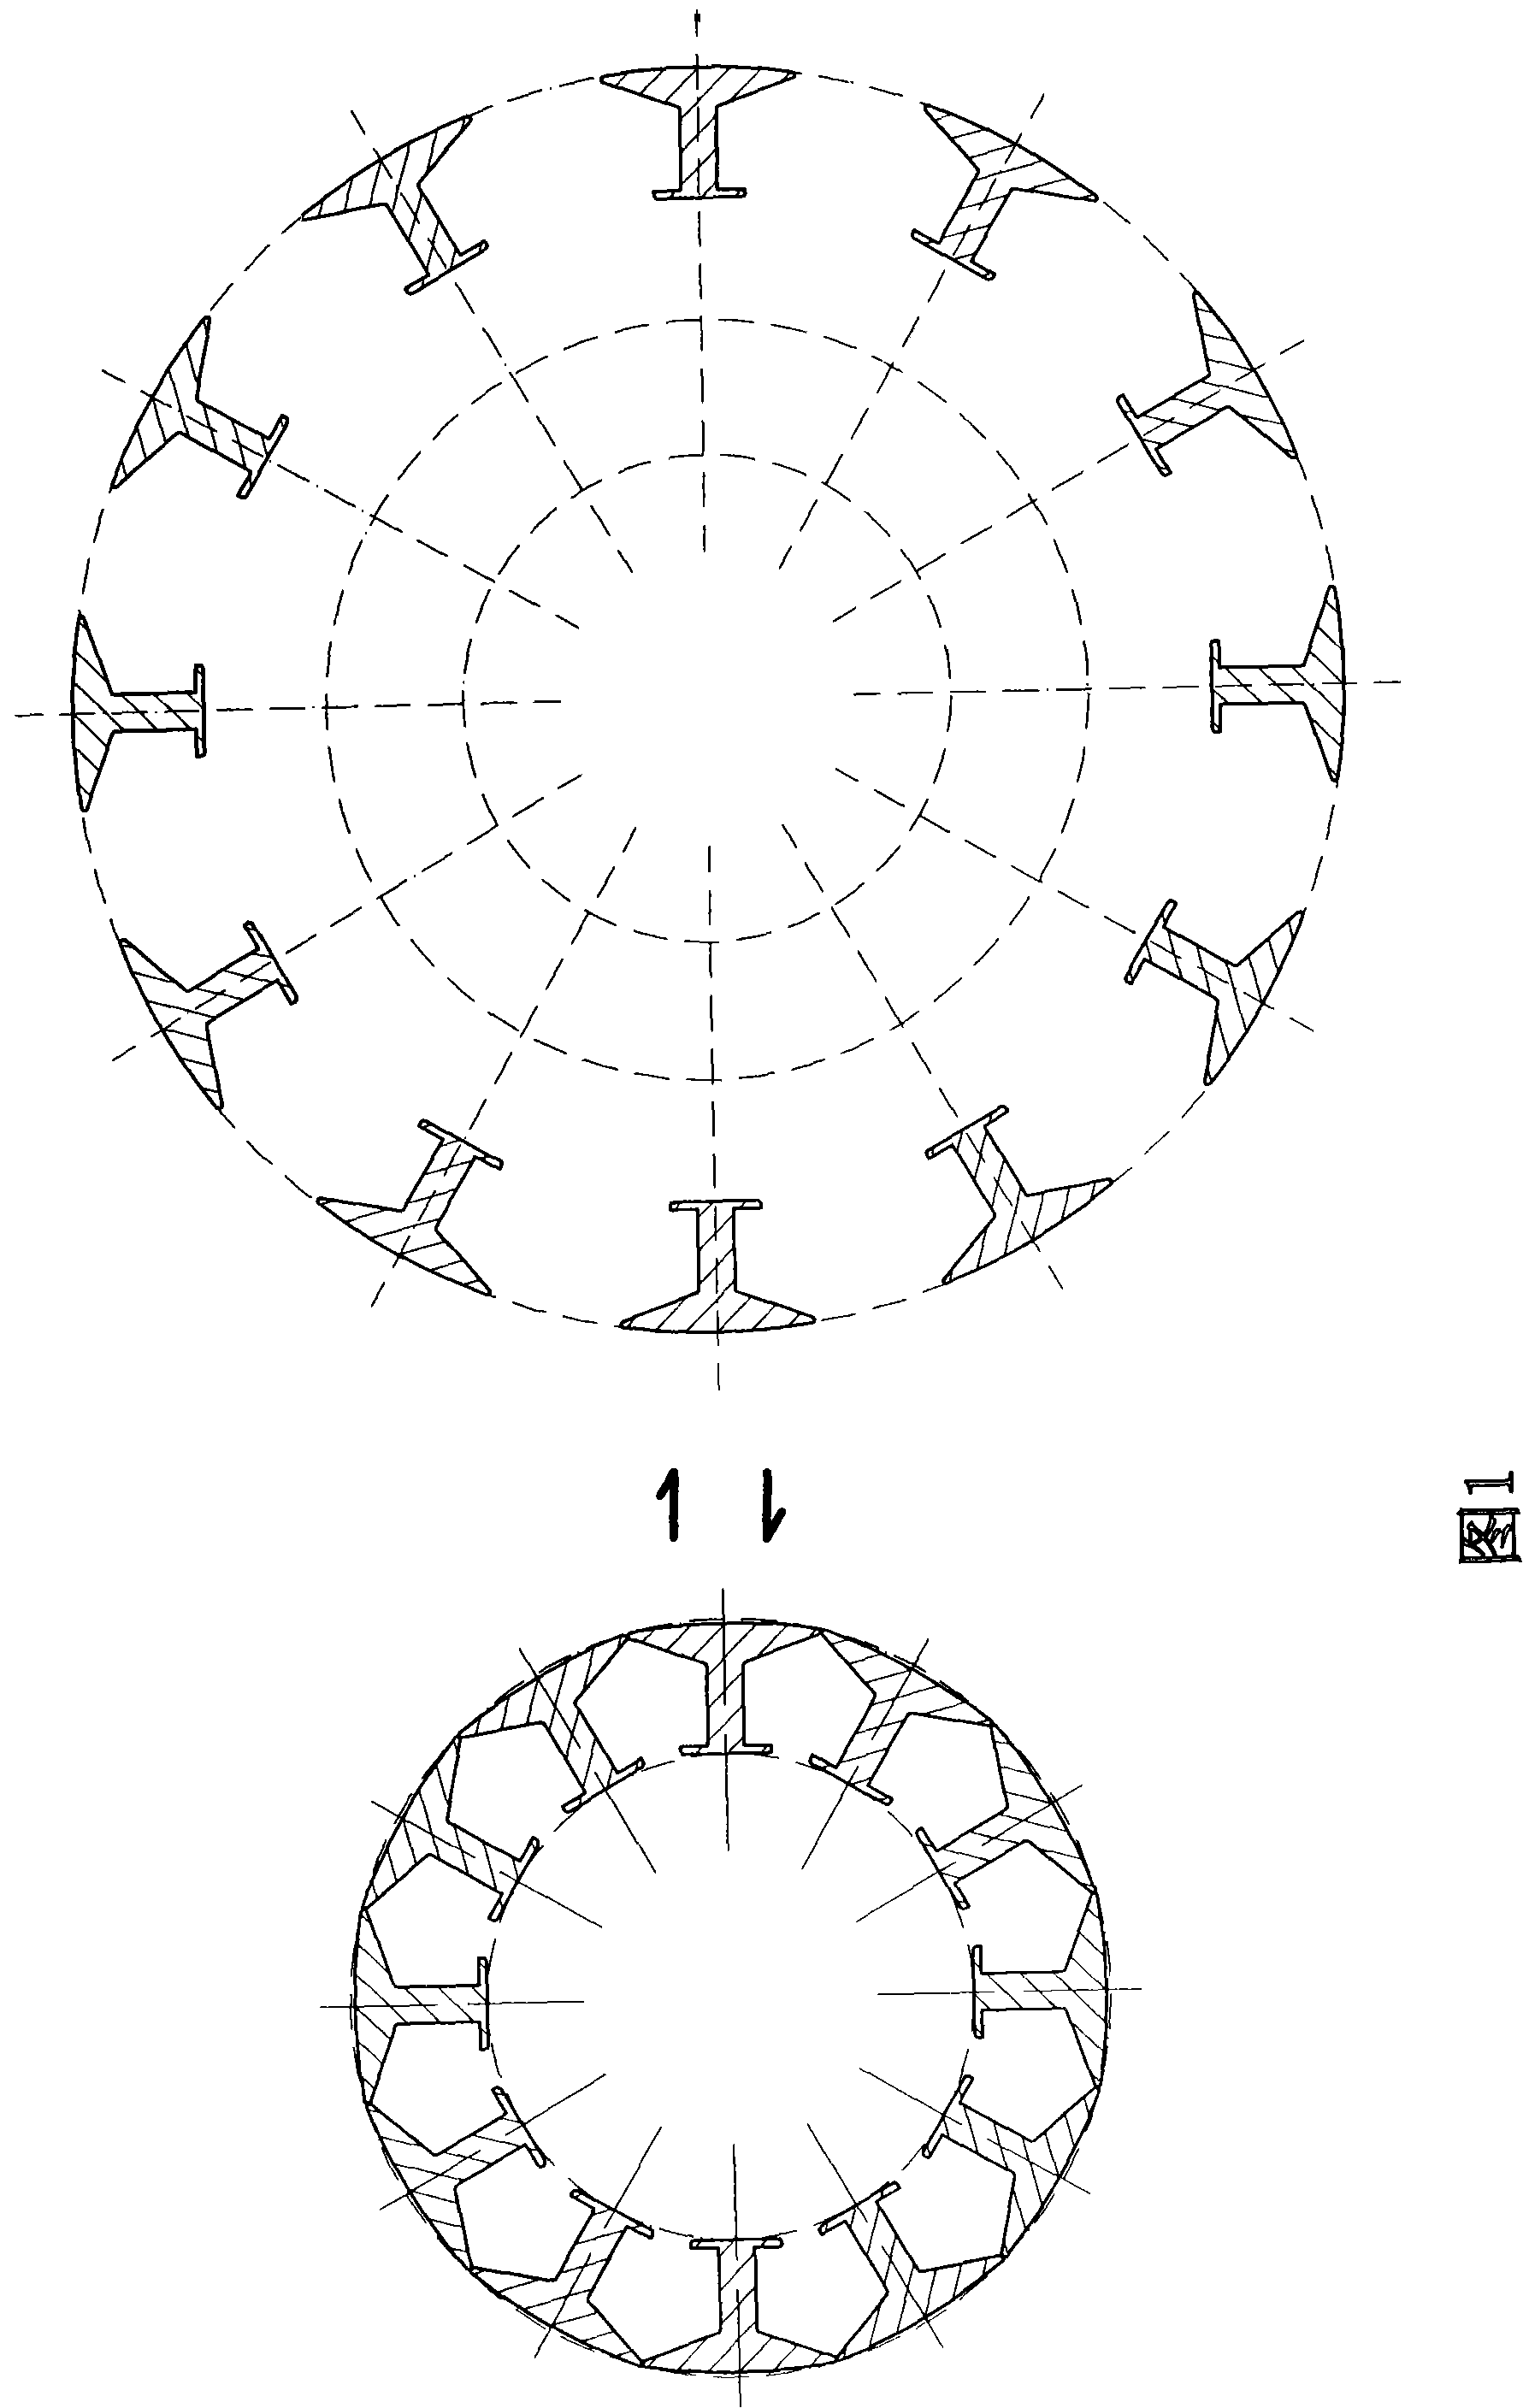 Rotating cage type belt pulley of continuously variable transmission